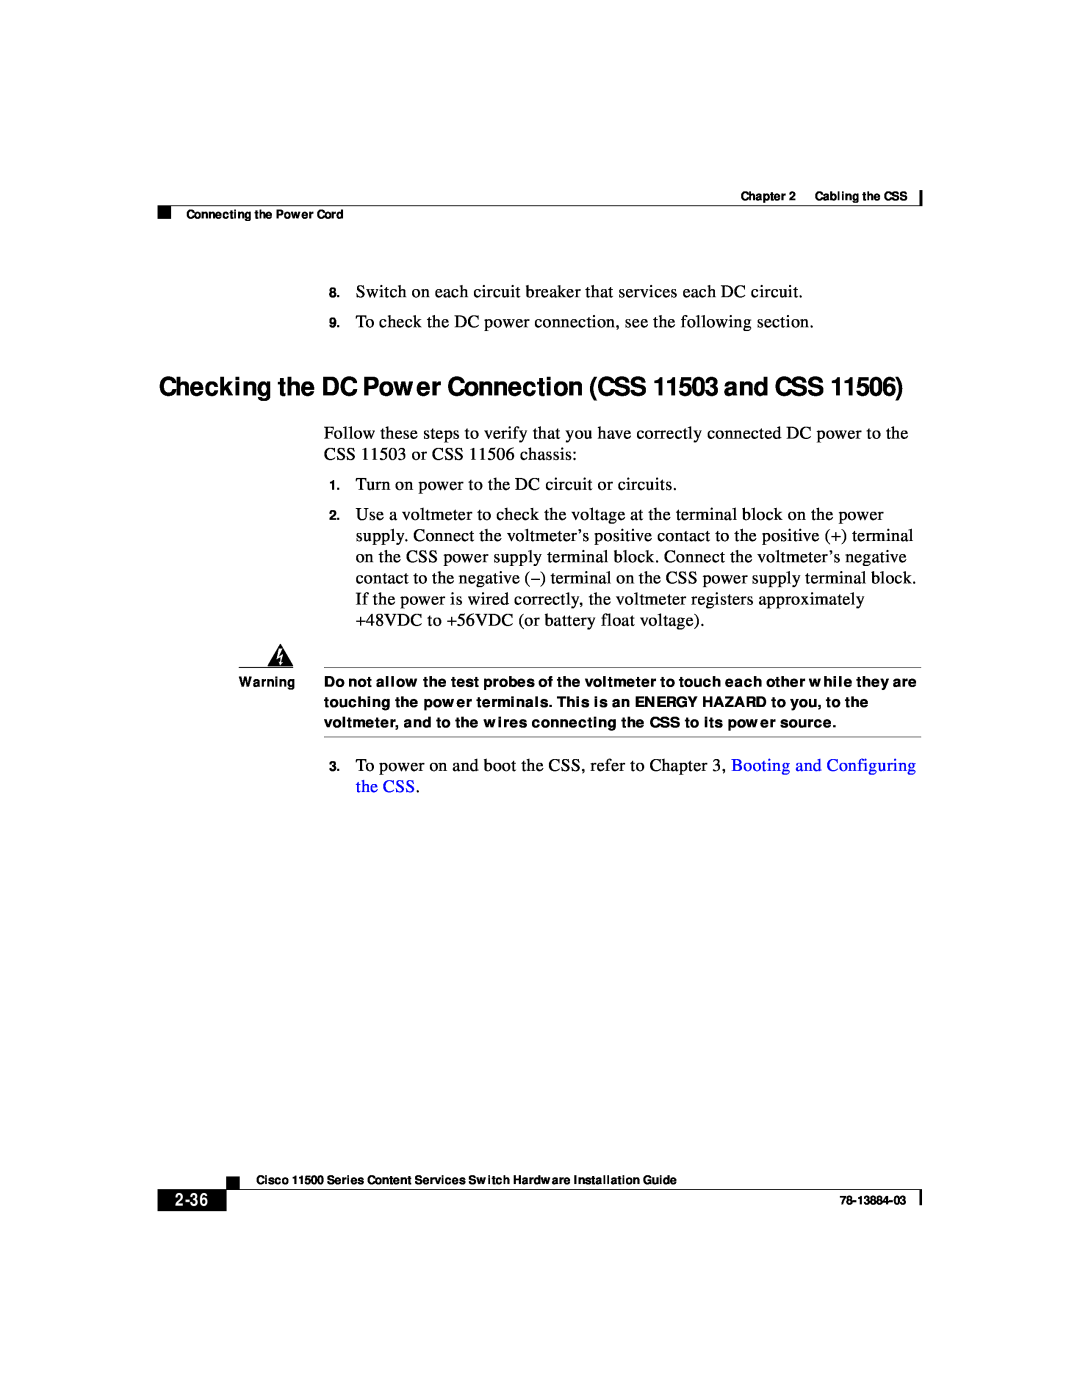 Cisco Systems 11500 Series manual Checking the DC Power Connection CSS 11503 and CSS, 2-36 